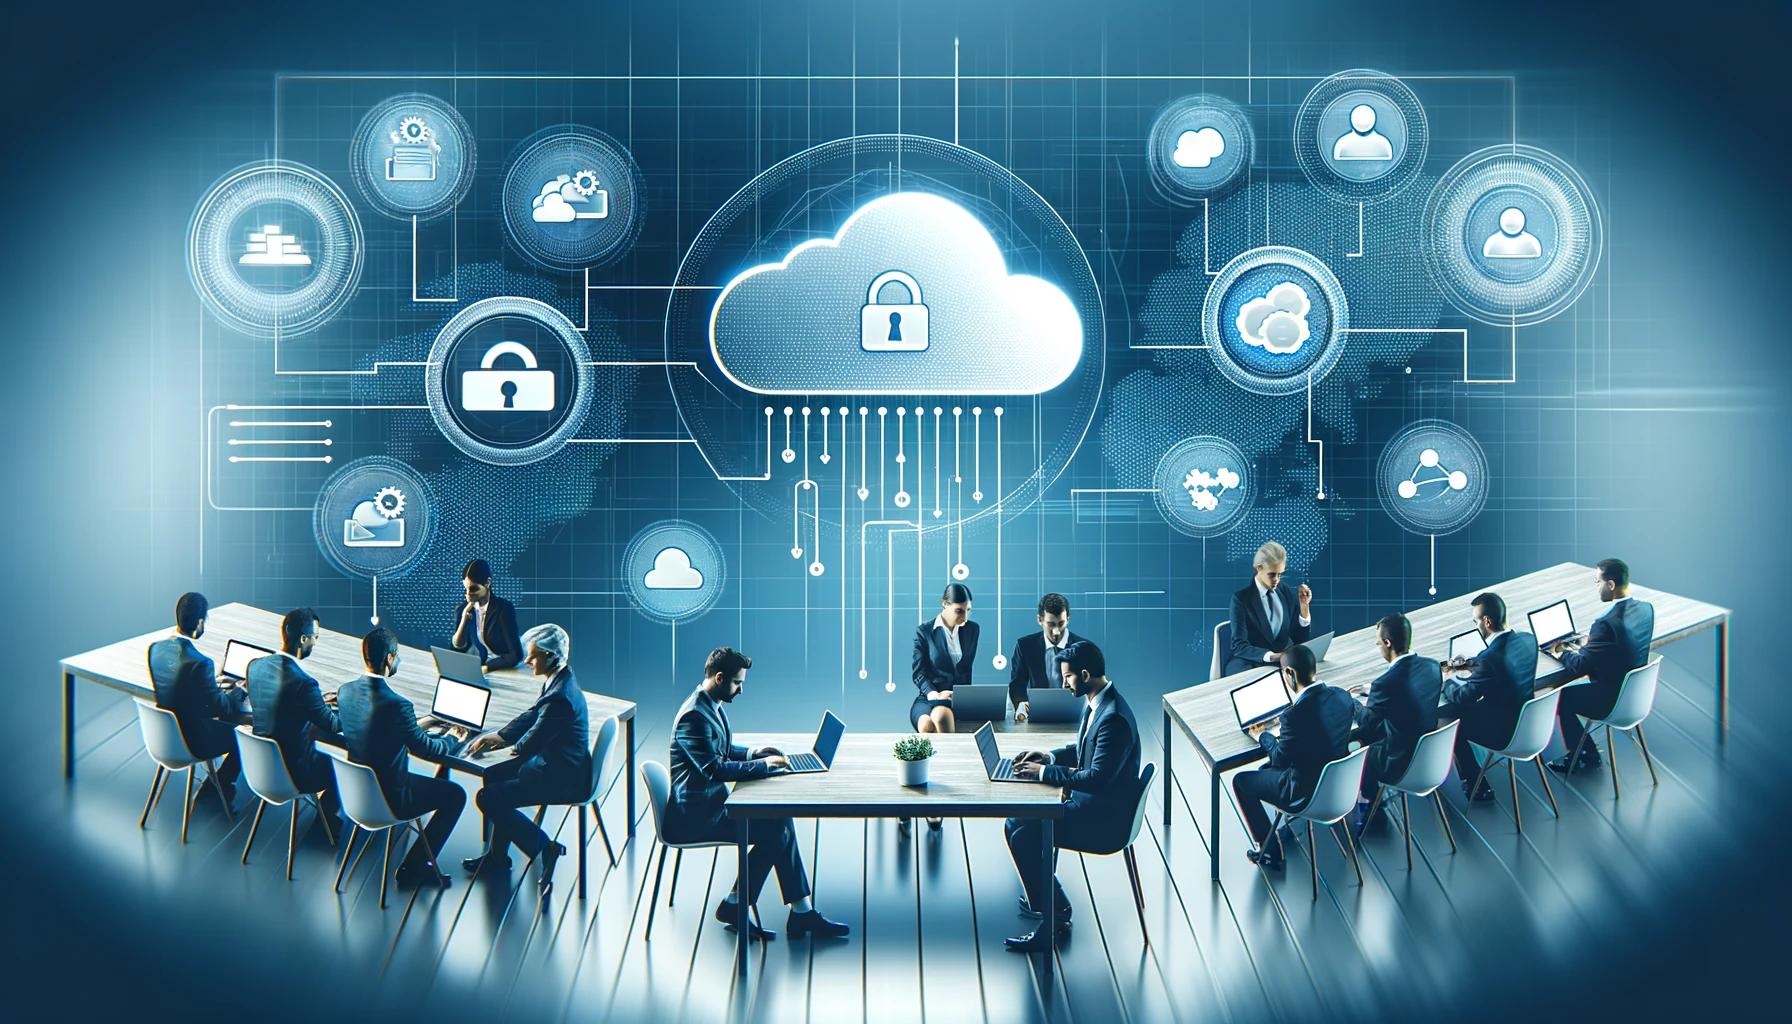 Top 5 Benefits of Cloud Management for Your Business